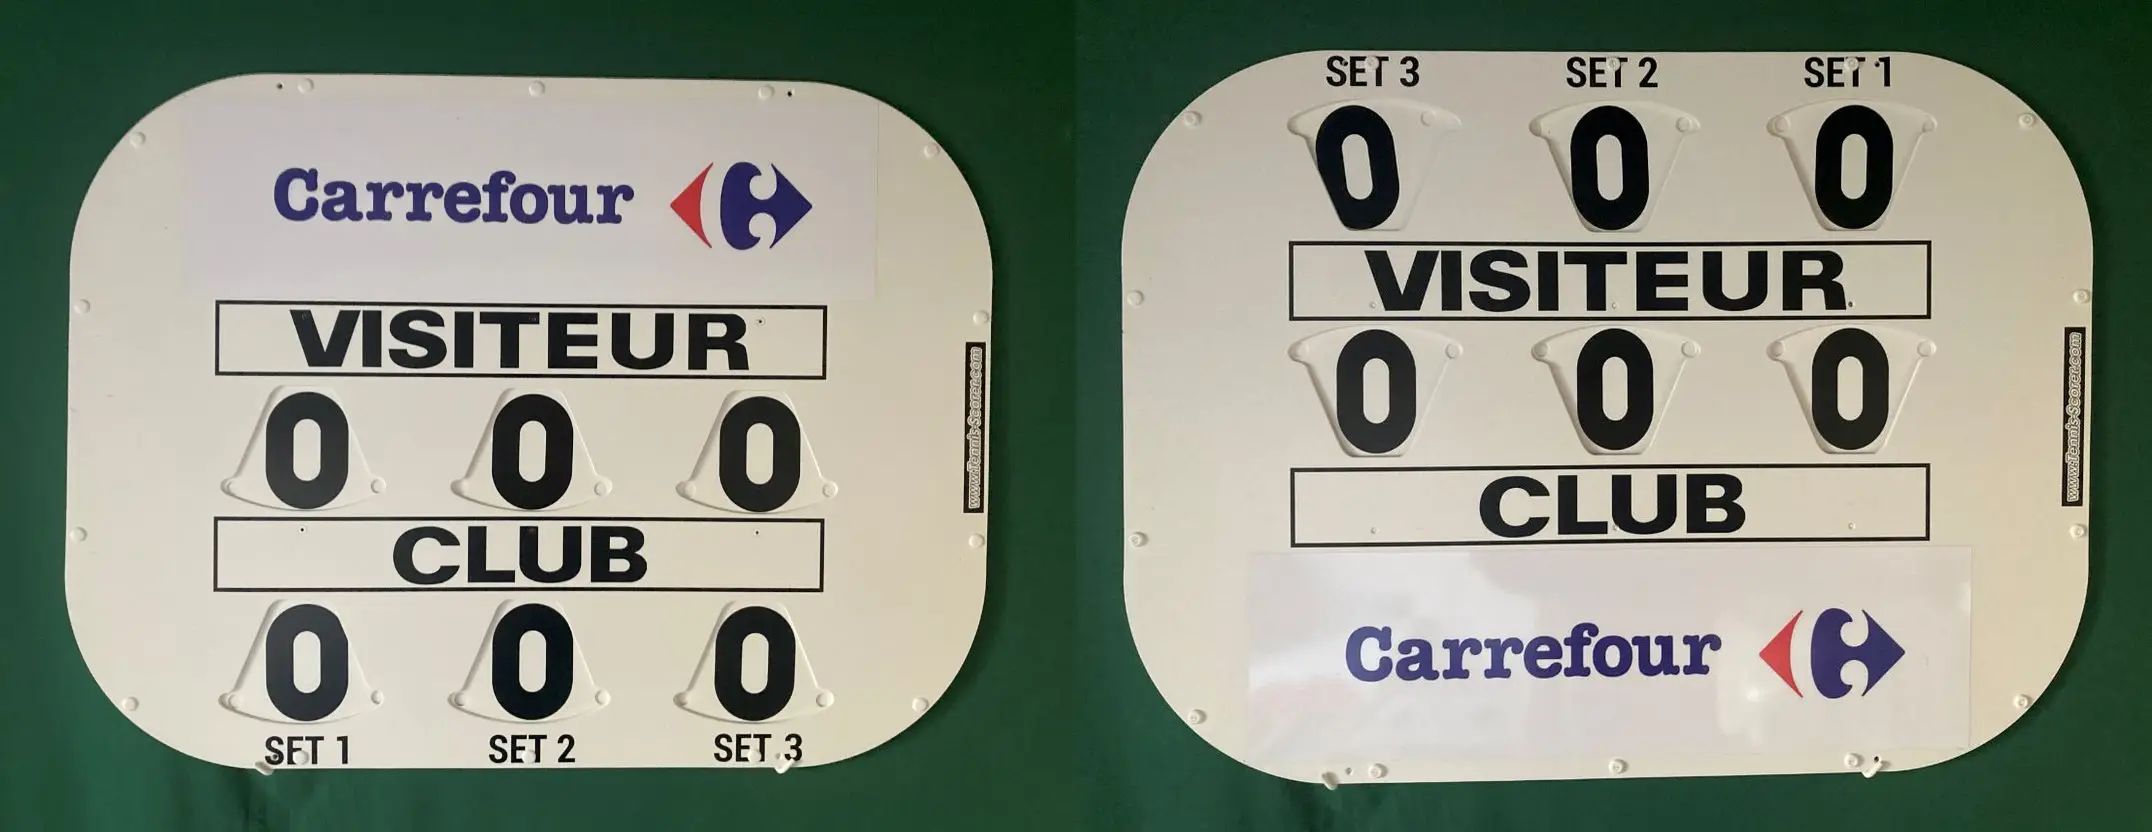 Manual Scoreboard Cliptec Double Sided 80 x 60 cm for Tennis Padel Handball Unperishable for All weather Outdoor or Indoor